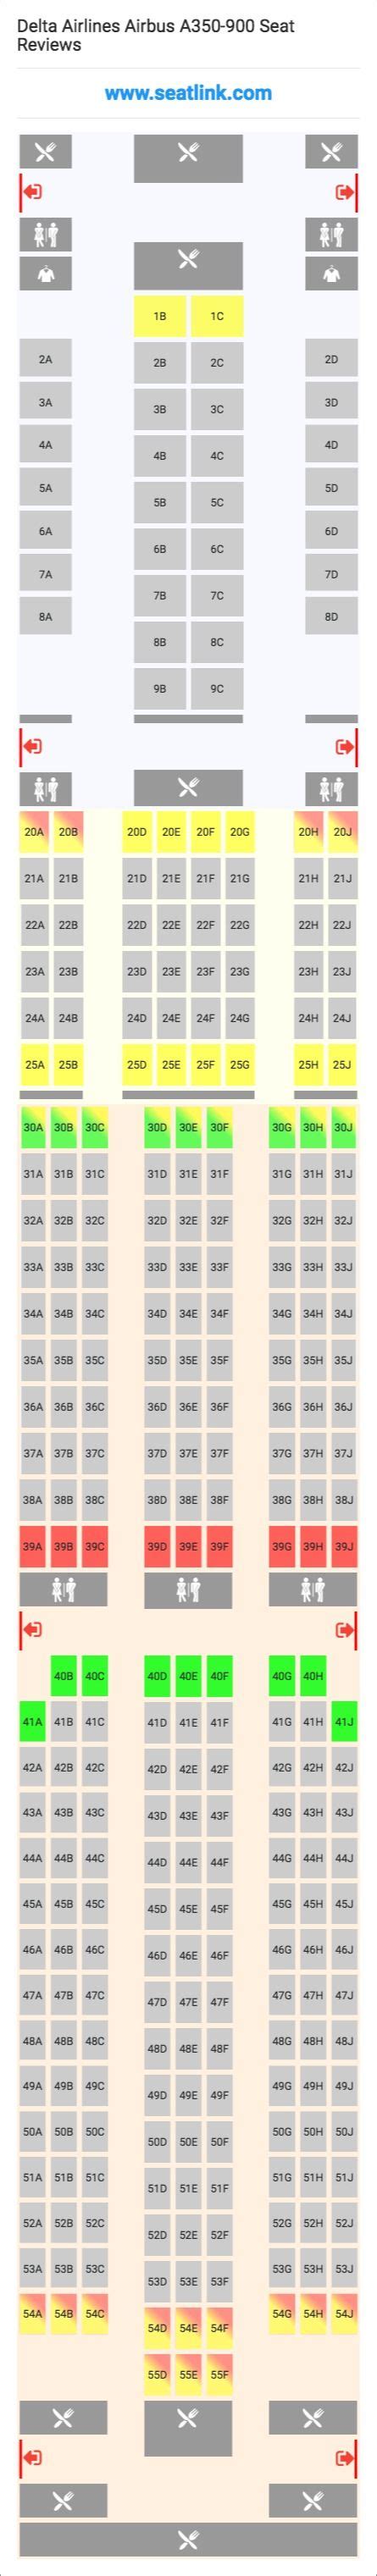 Singapore airlines airbus a350 seat map. Delta Airlines Airbus A350-900 (359) Seat Map | Delta ...